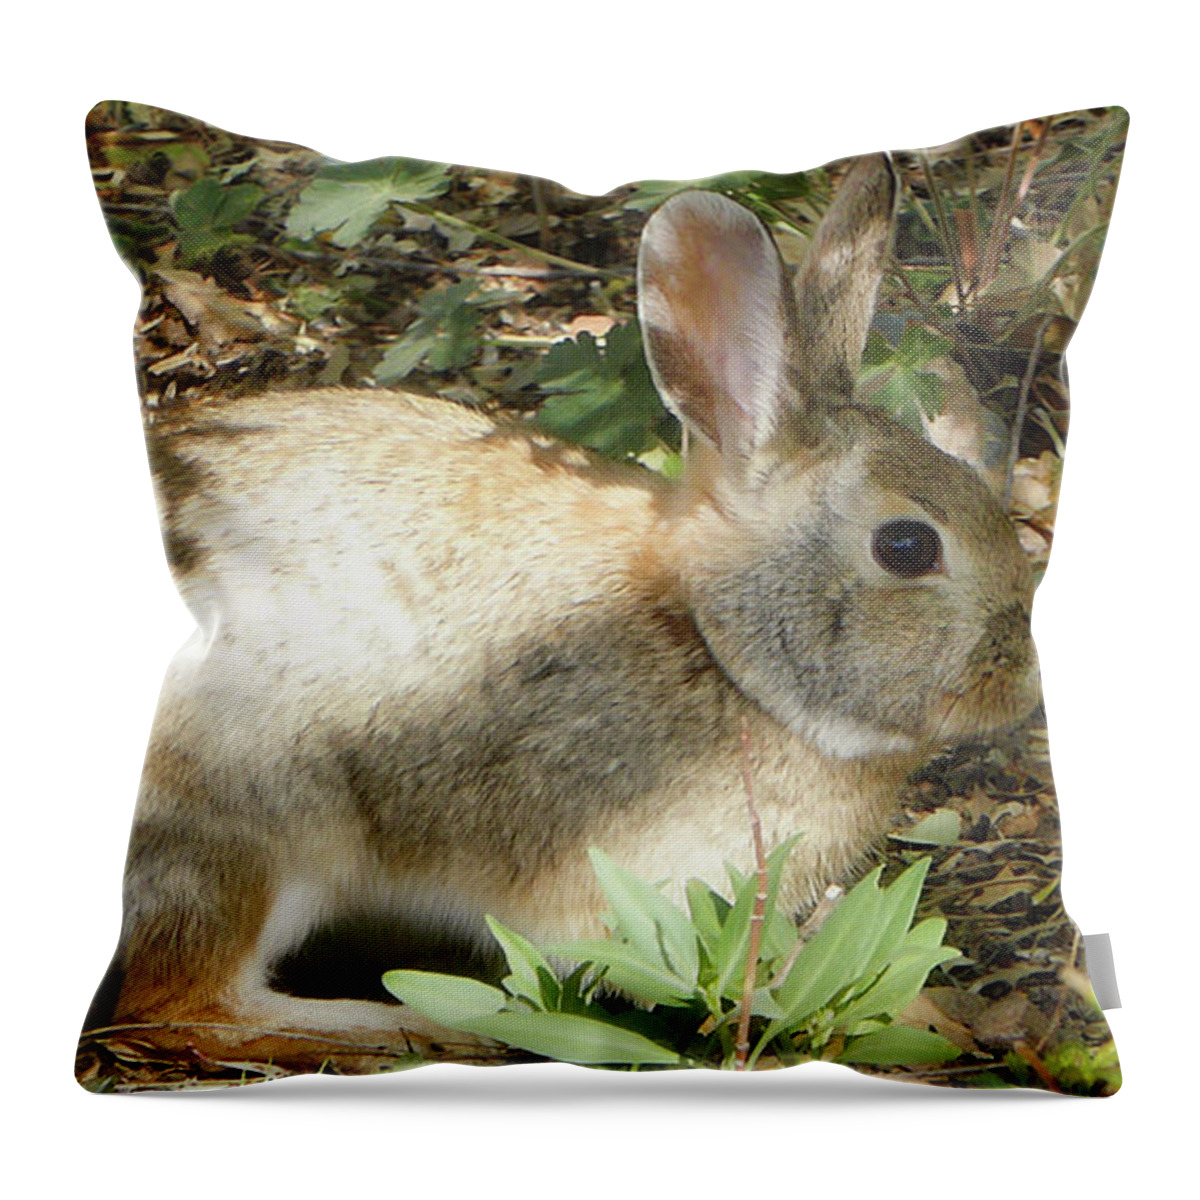 Animals Throw Pillow featuring the photograph Cottontail by Segura Shaw Photography